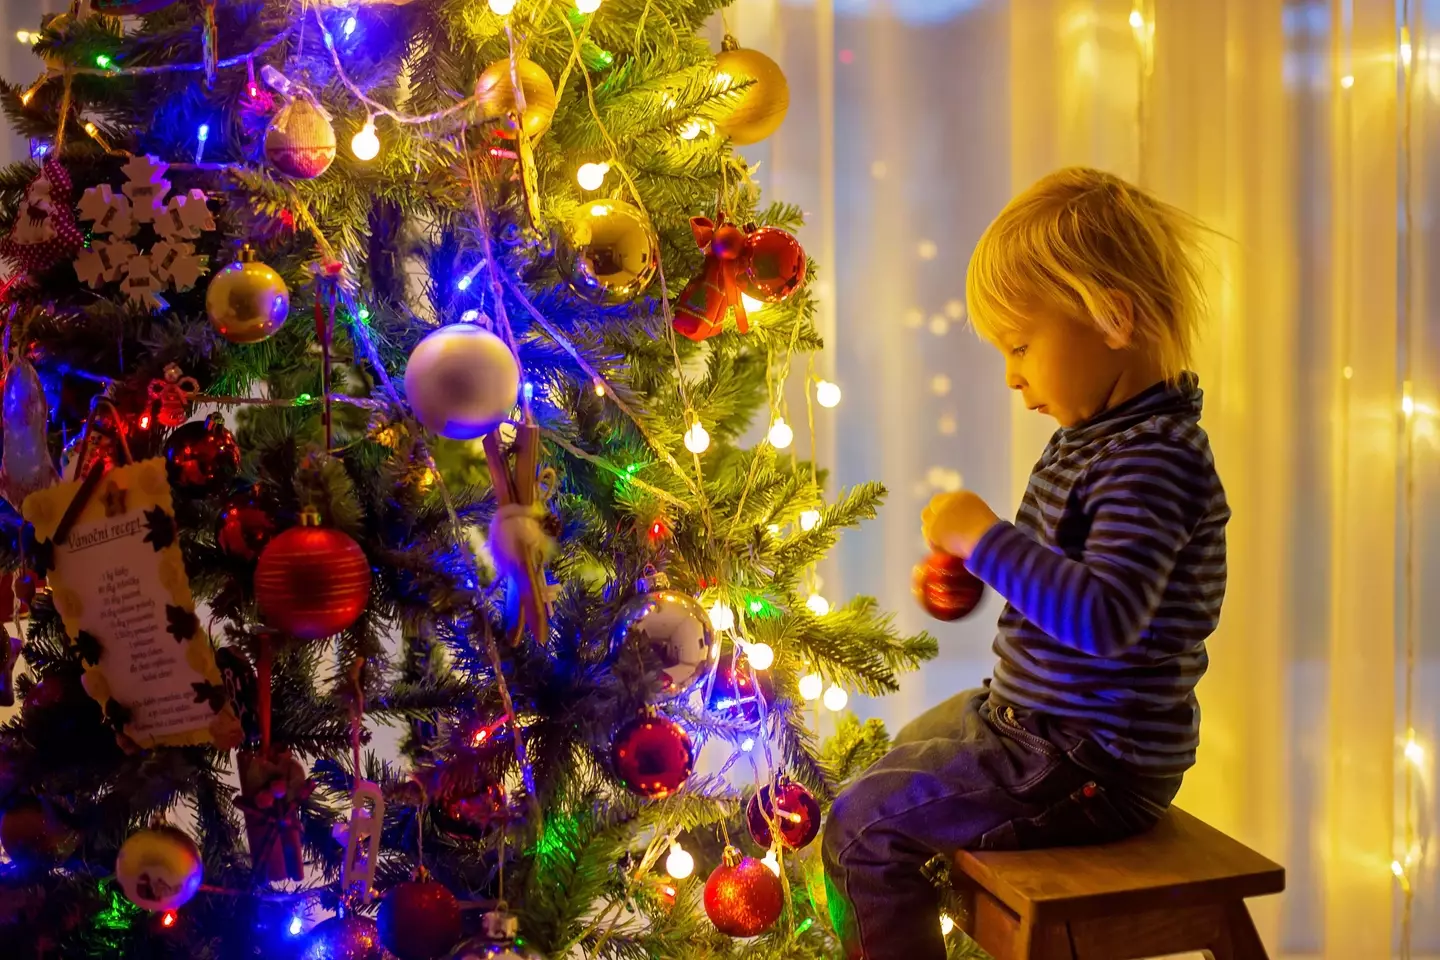 According to tradition, a Christmas tree should actually be put up at the start of Advent.